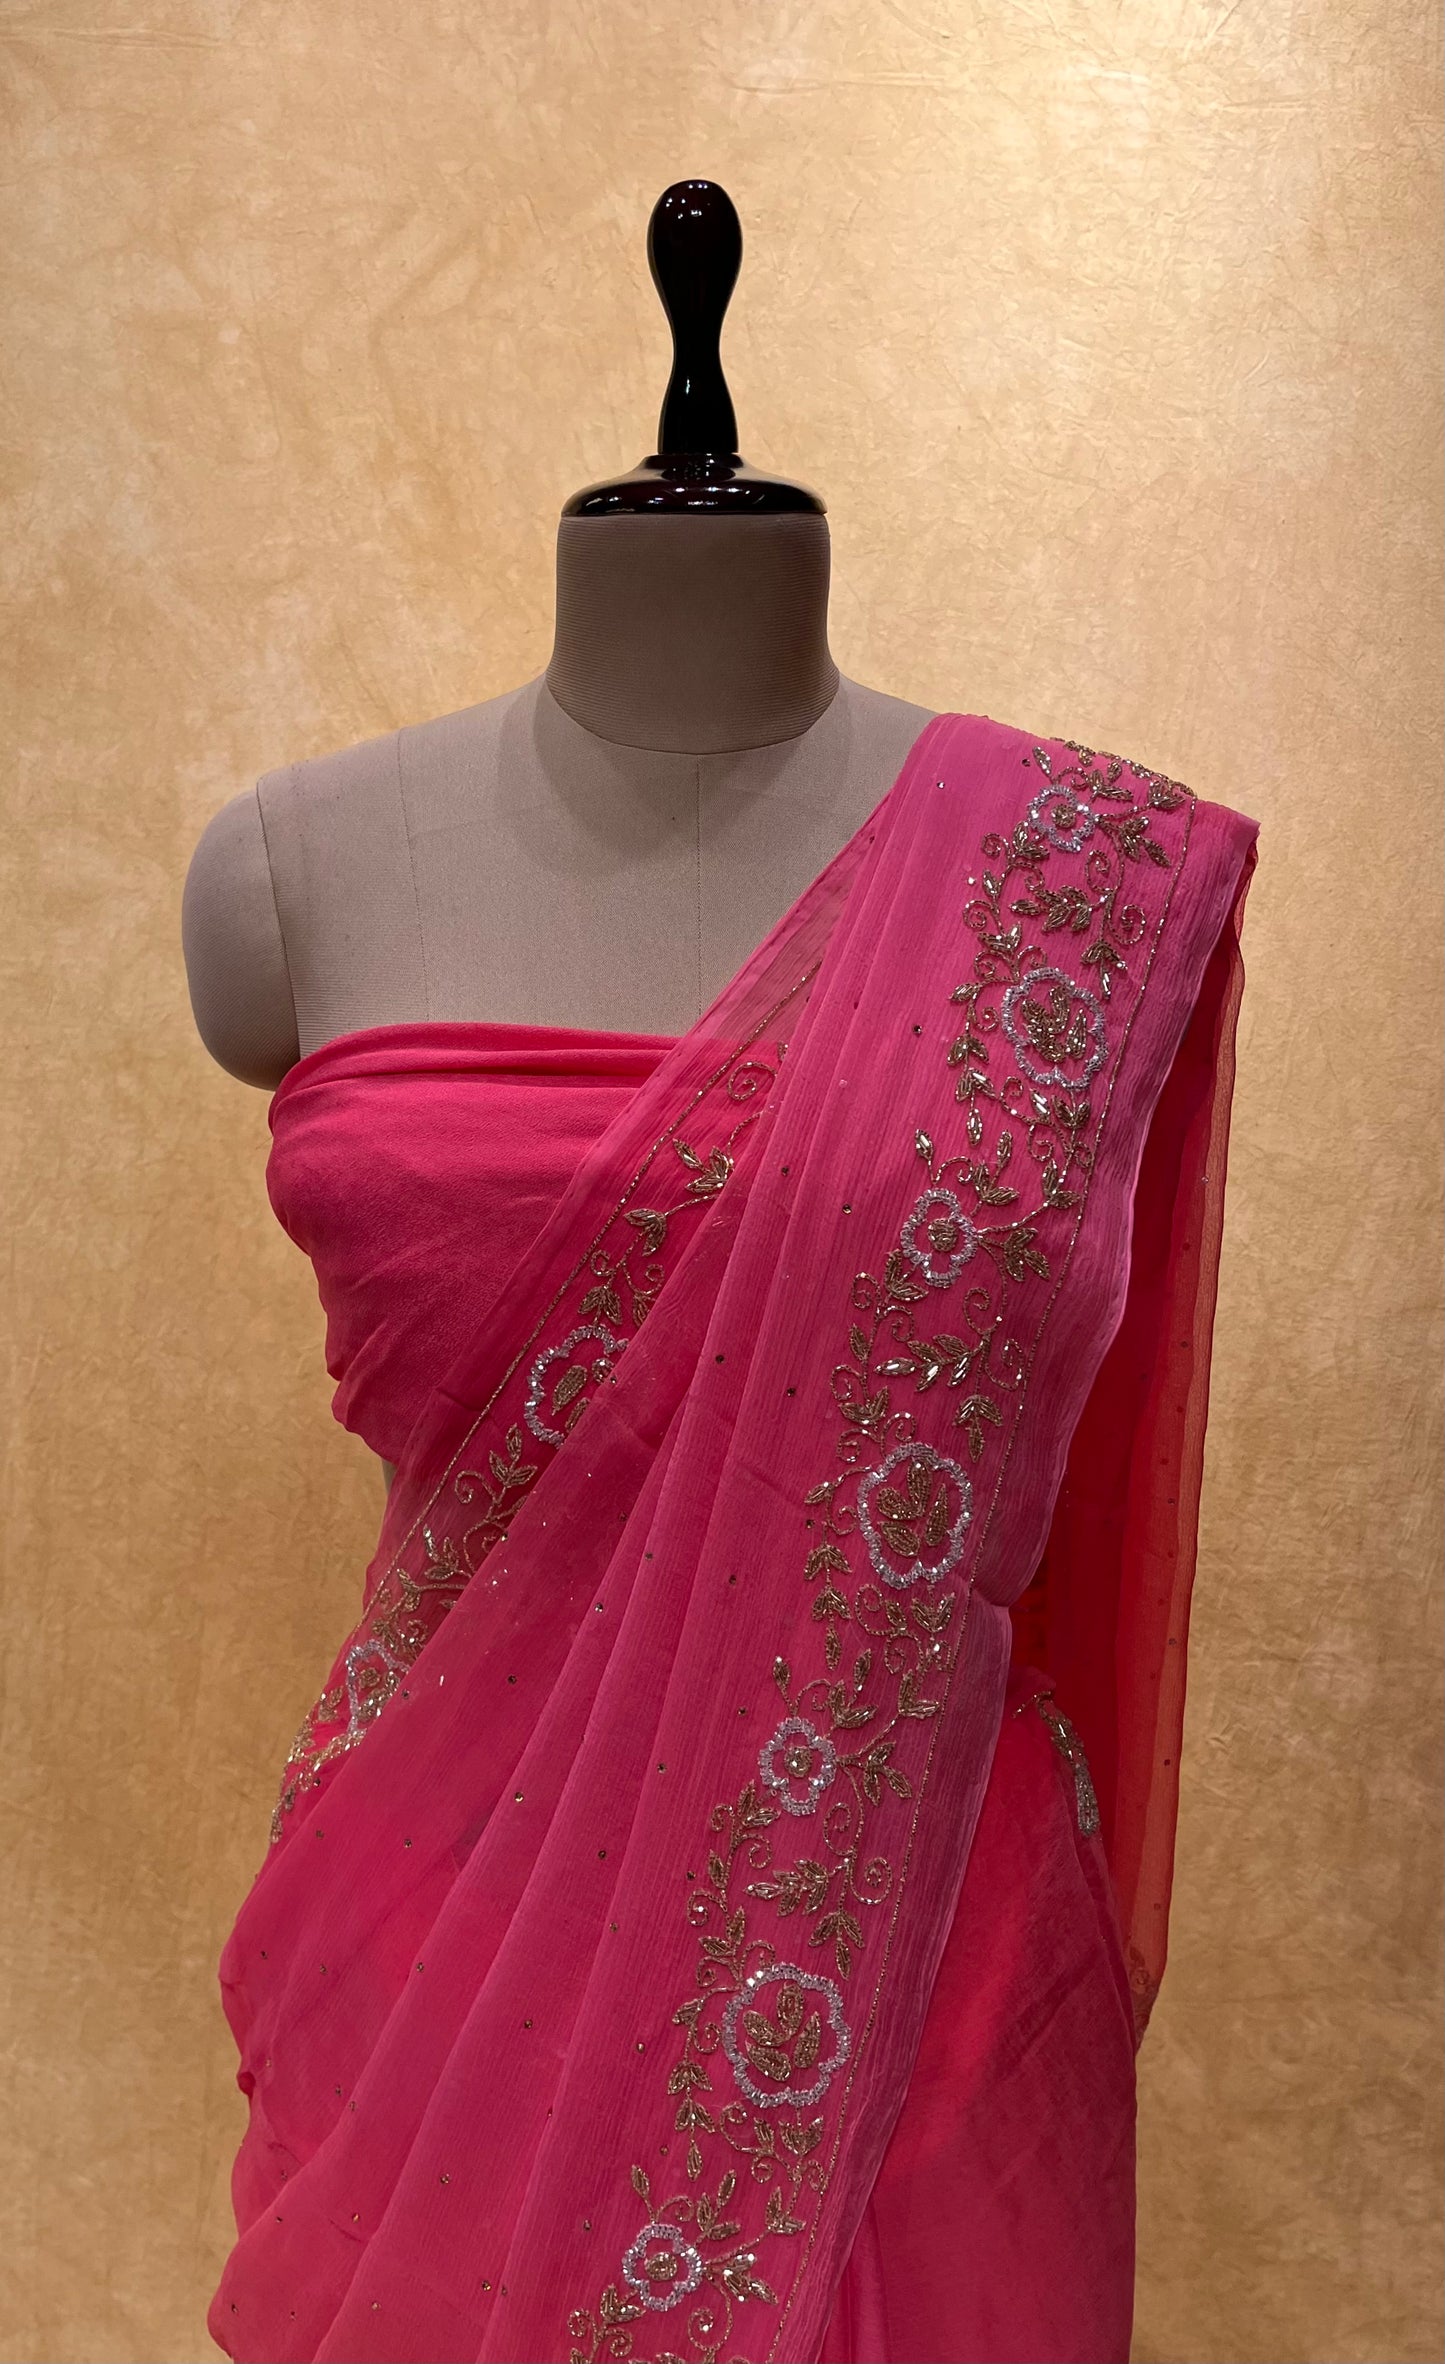 PINK COLOUR SHADED CHIFFON HAND EMBROIDERED SAREE EMBELLISHED WITH CUTDANA WORK